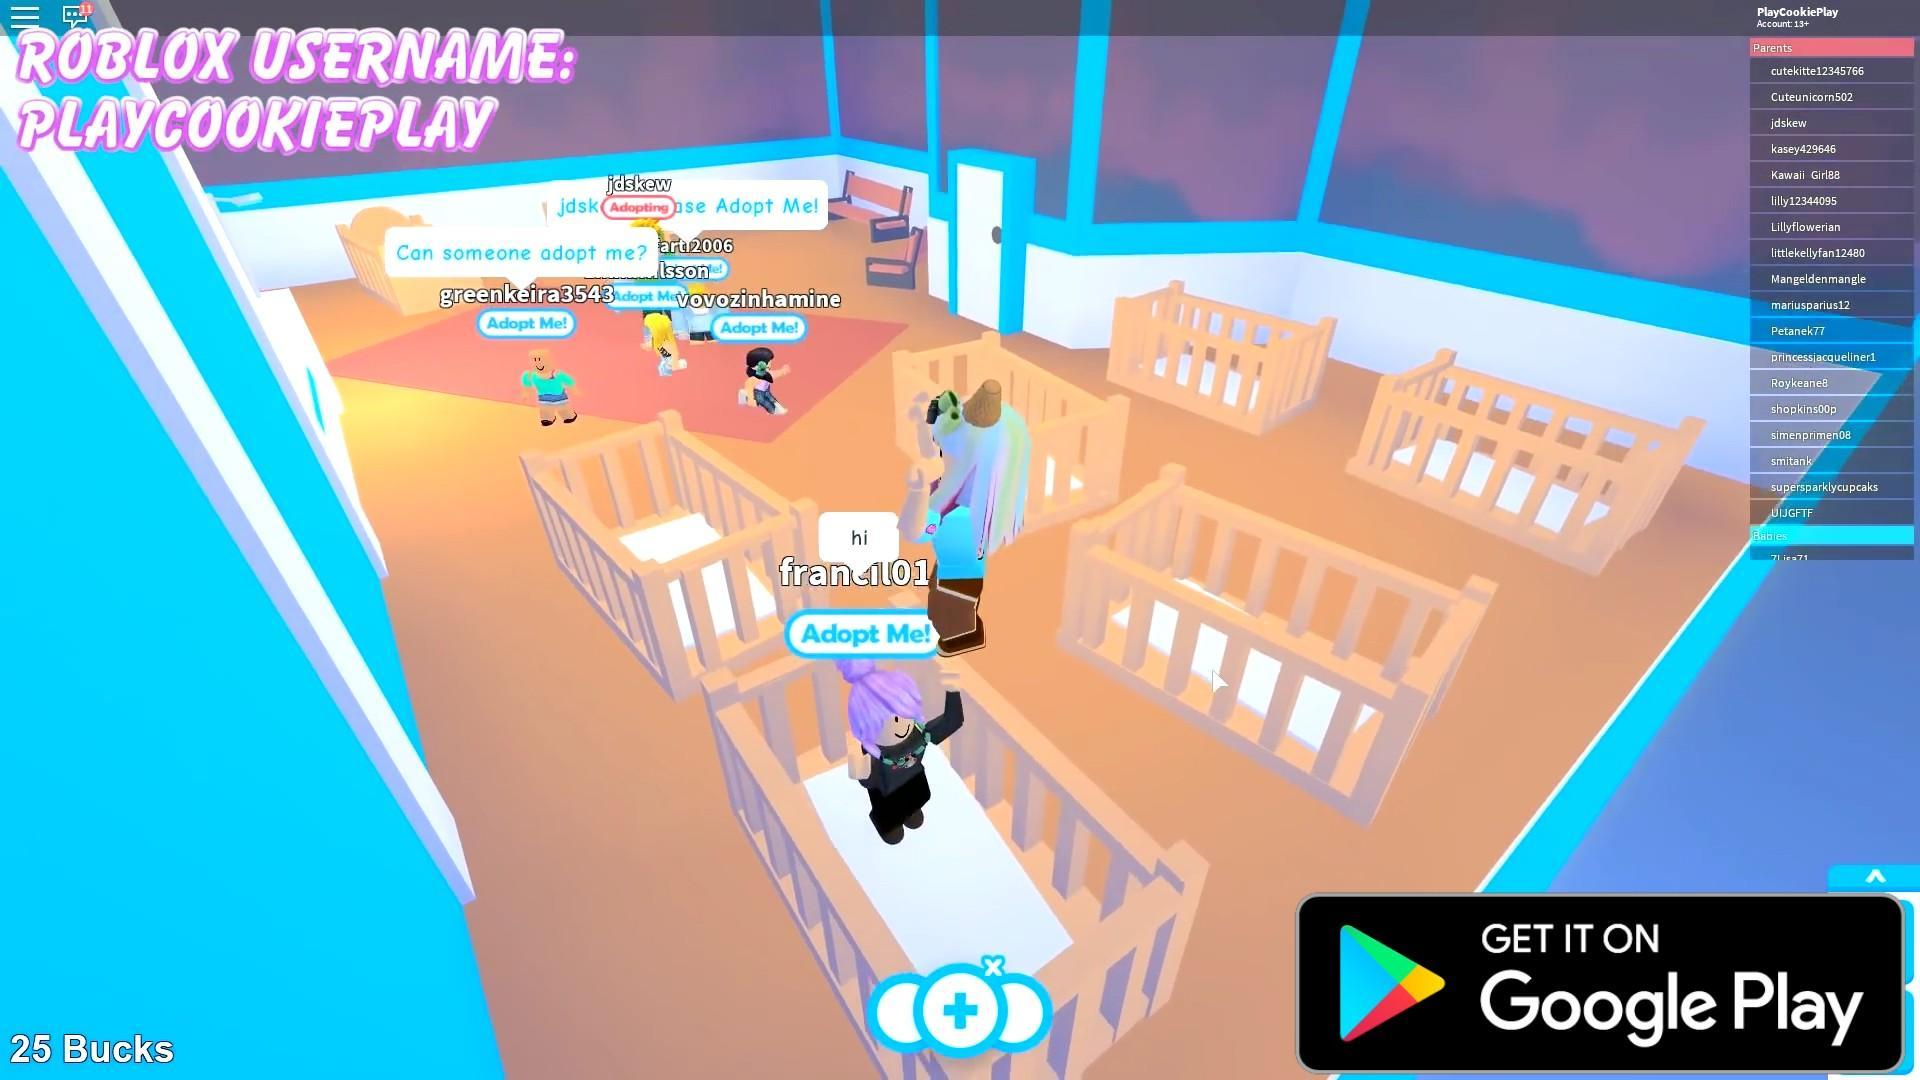 Guide For Cookie Swirl C Roblox For Android Apk Download - guide of cookie swirl c roblox girl for android apk download